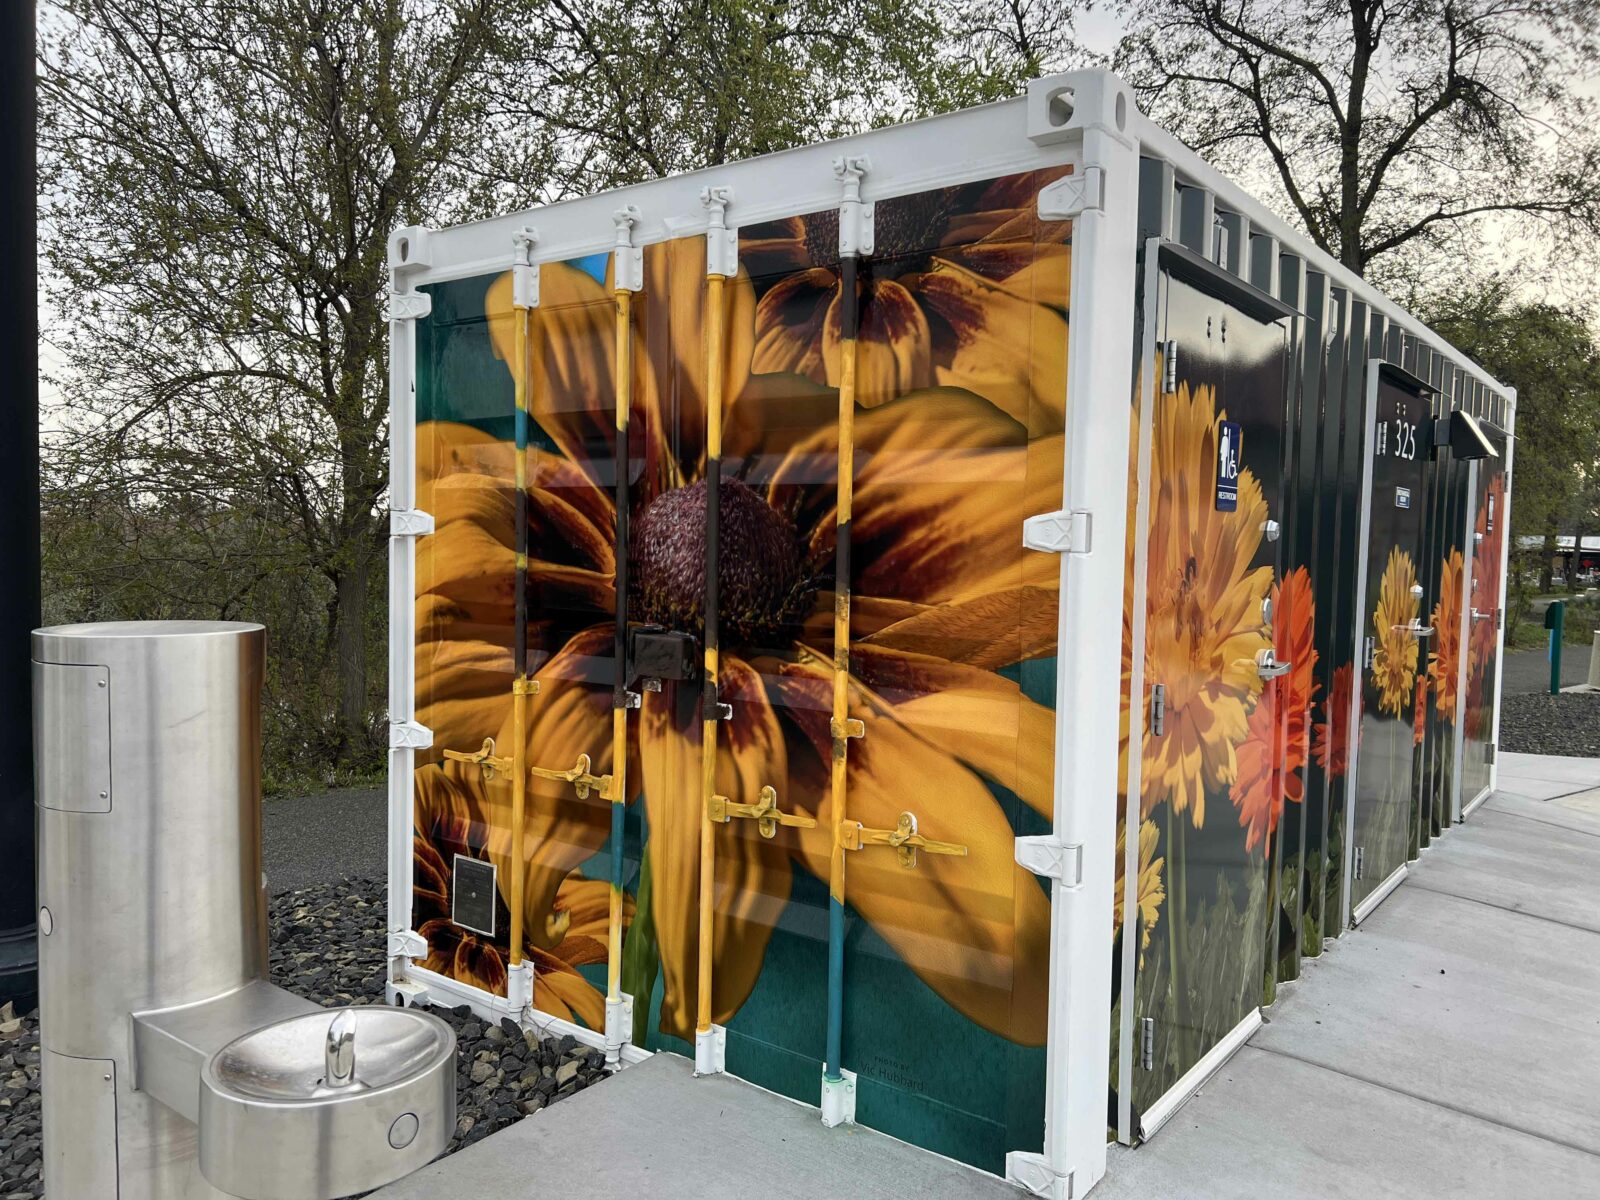 Vinyl wraps featuring colorful floral imagery cover the outside of a shipping container restroom at Columbia Gardens Wine & Artisan Village.